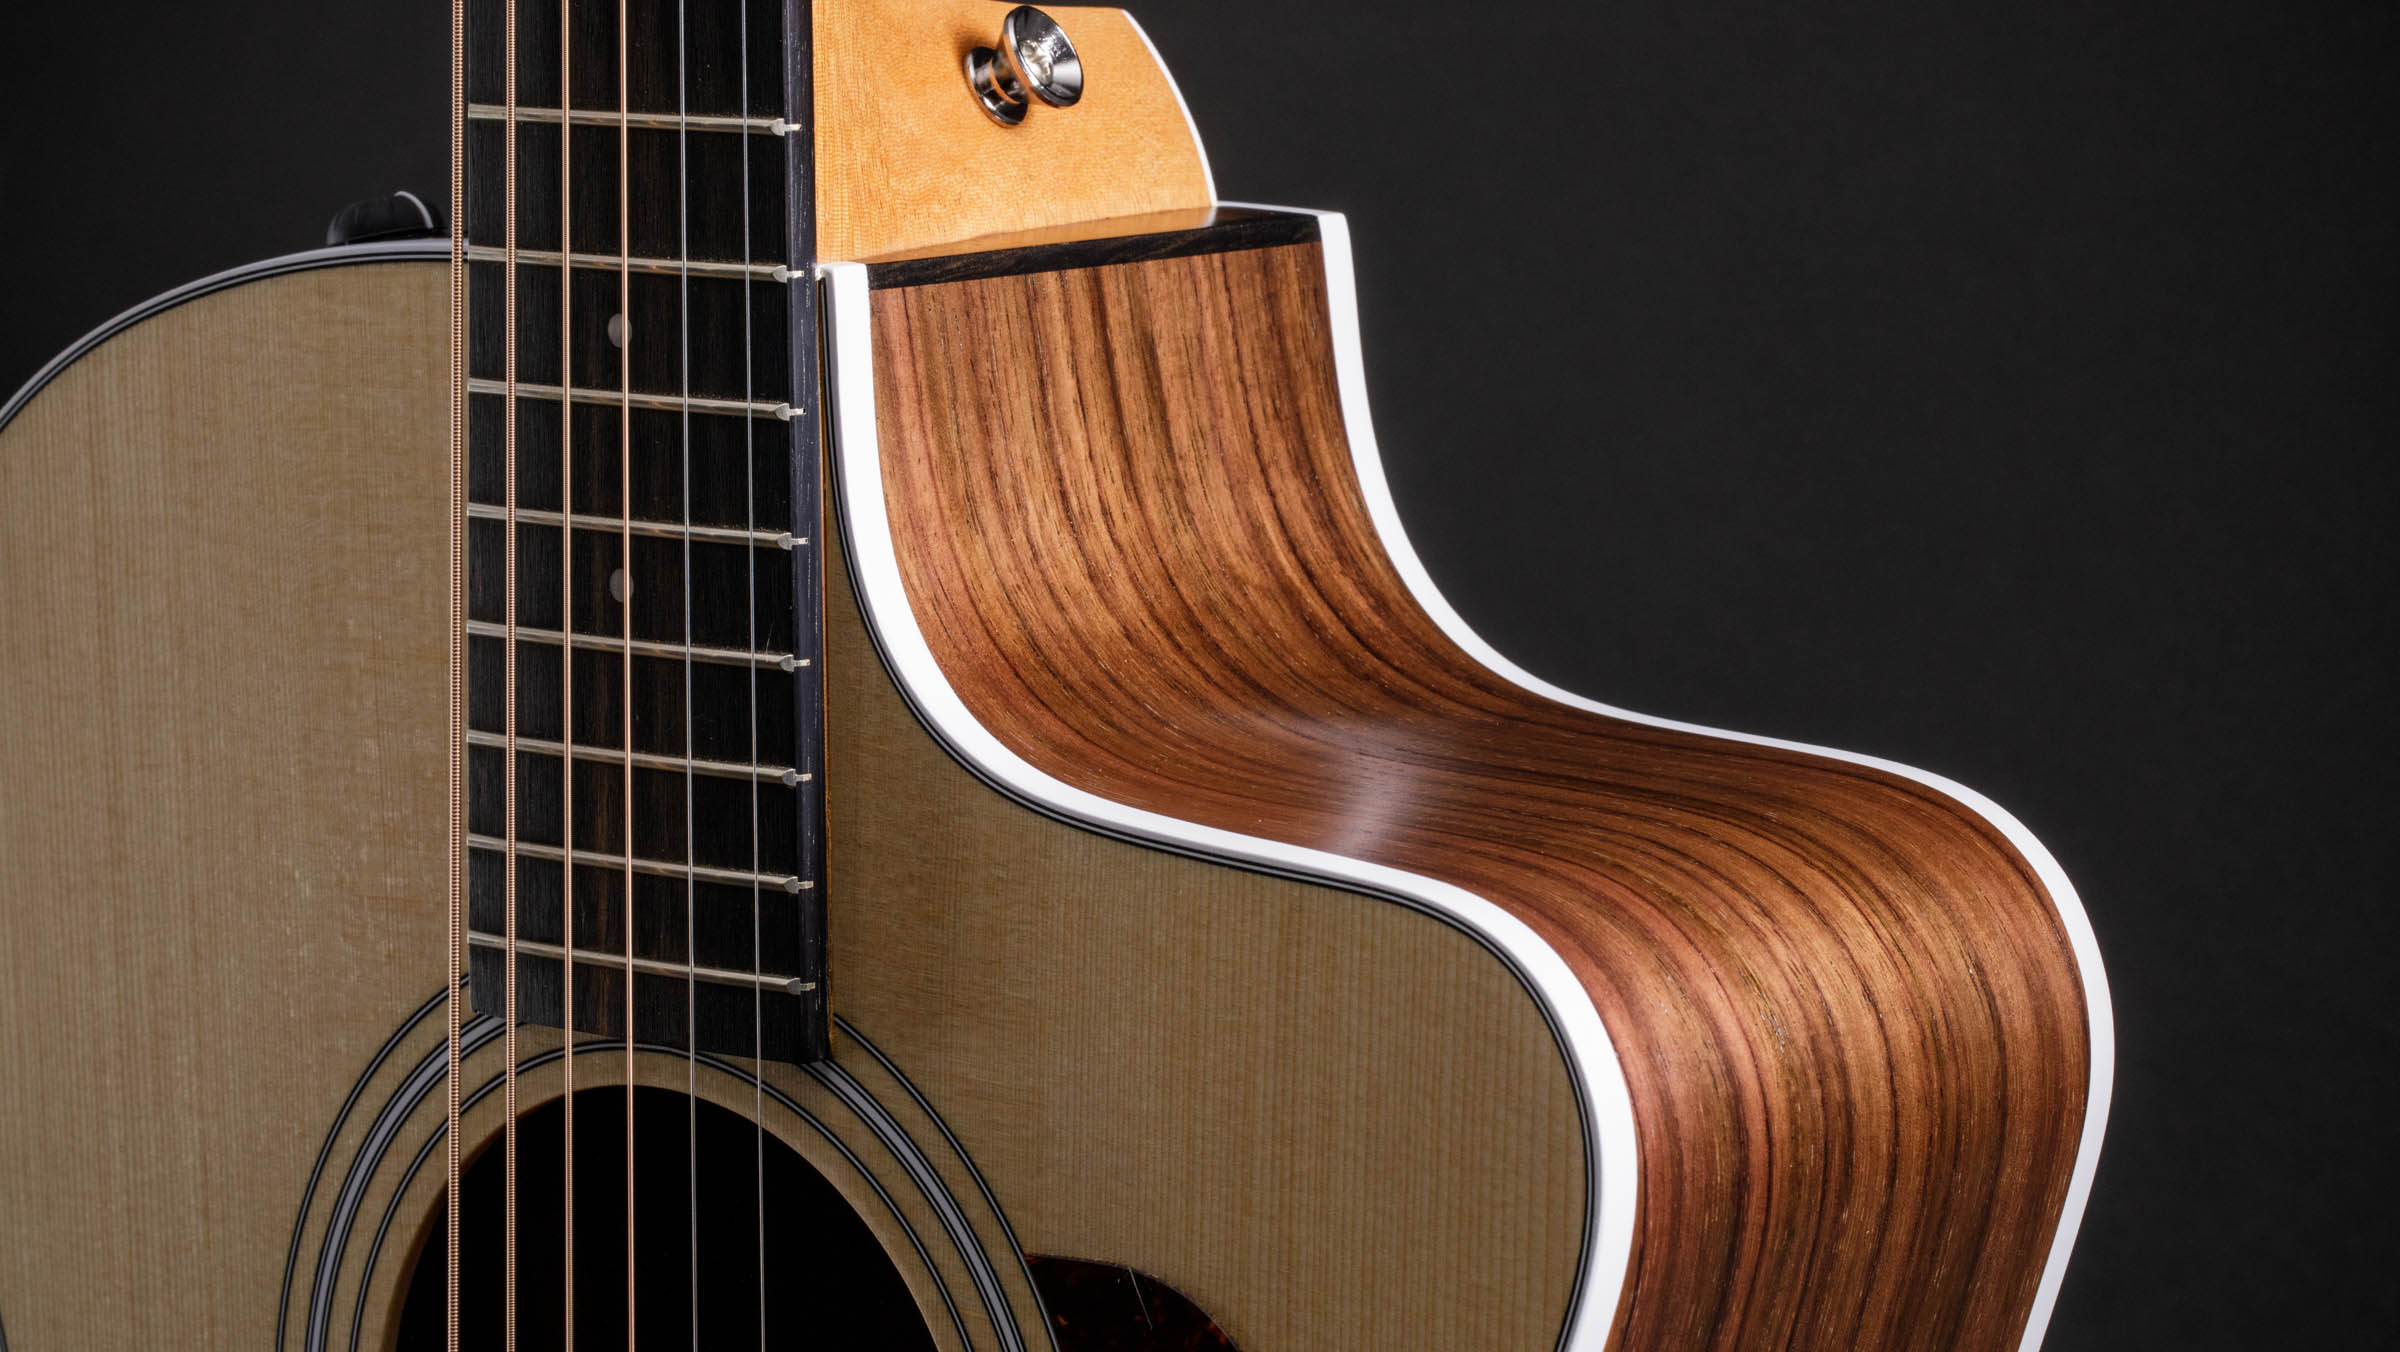 214ce Layered Rosewood Acoustic-Electric Guitar | Taylor Guitars